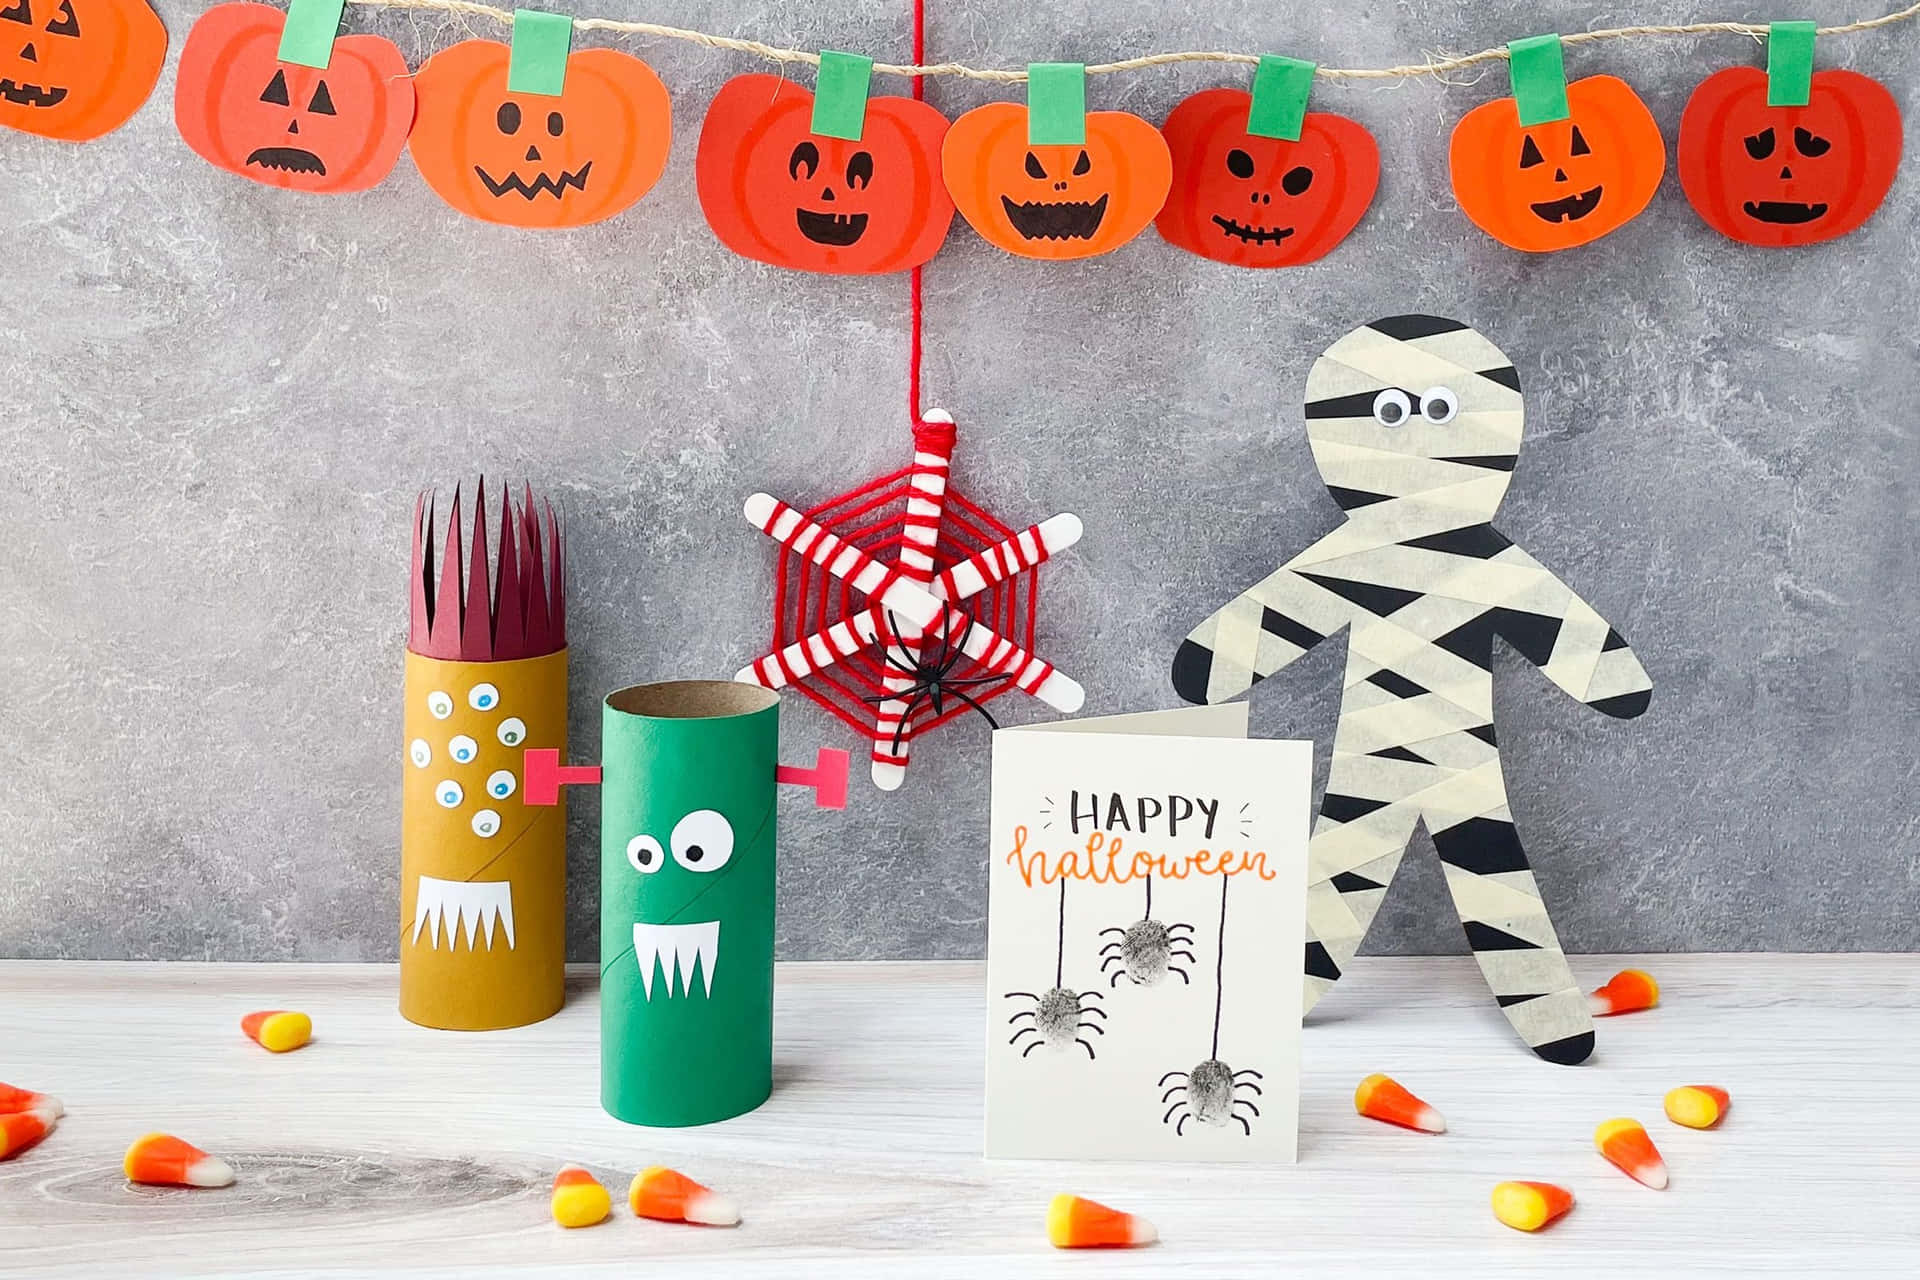 Get ready for Halloween with these fun and easy crafts! Wallpaper